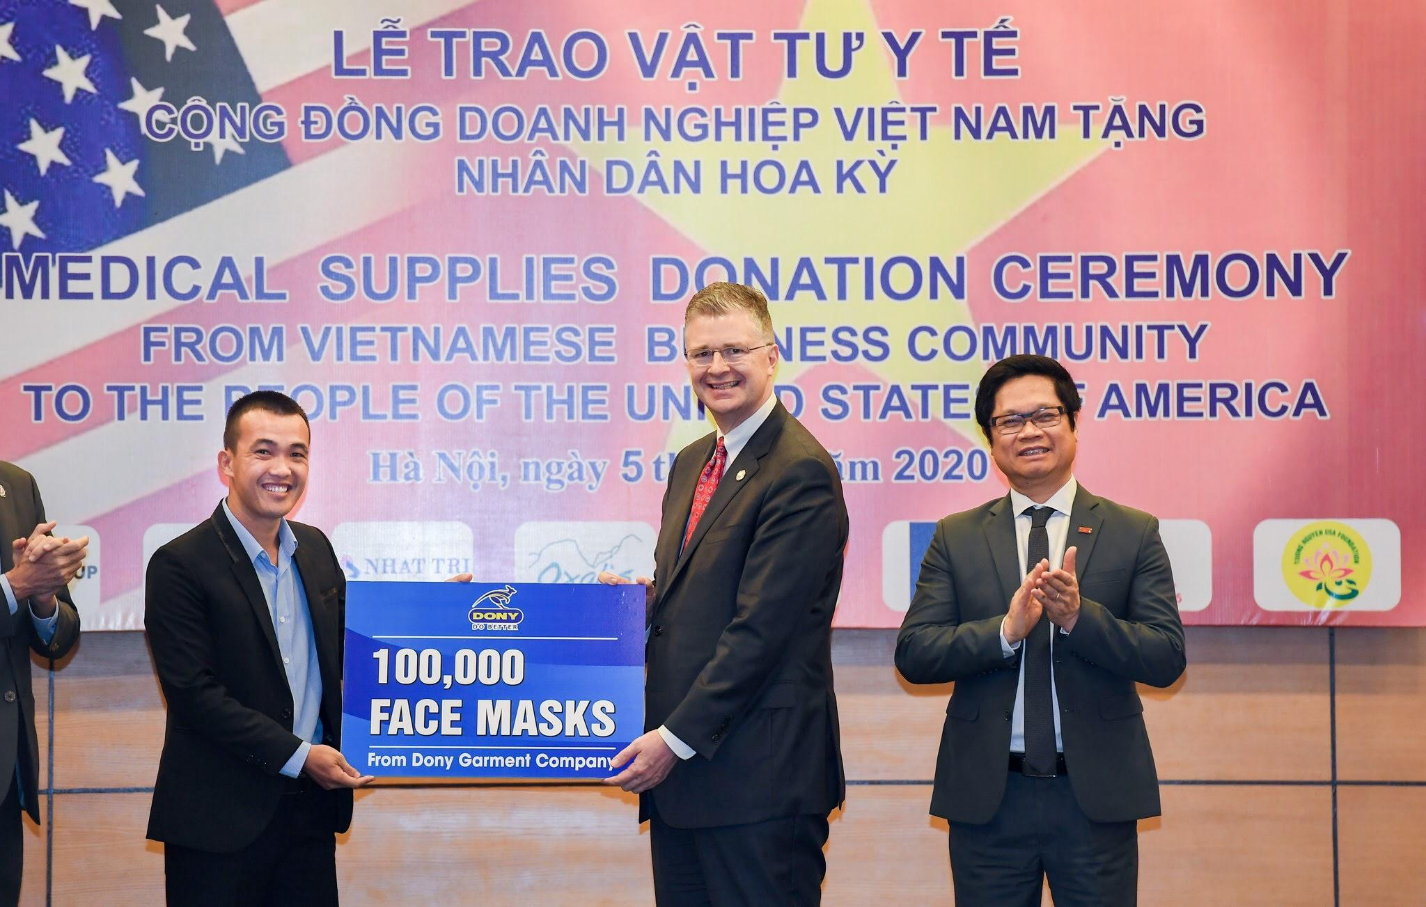 Vietnamese businesses donate 1.4 million medical supply units to US